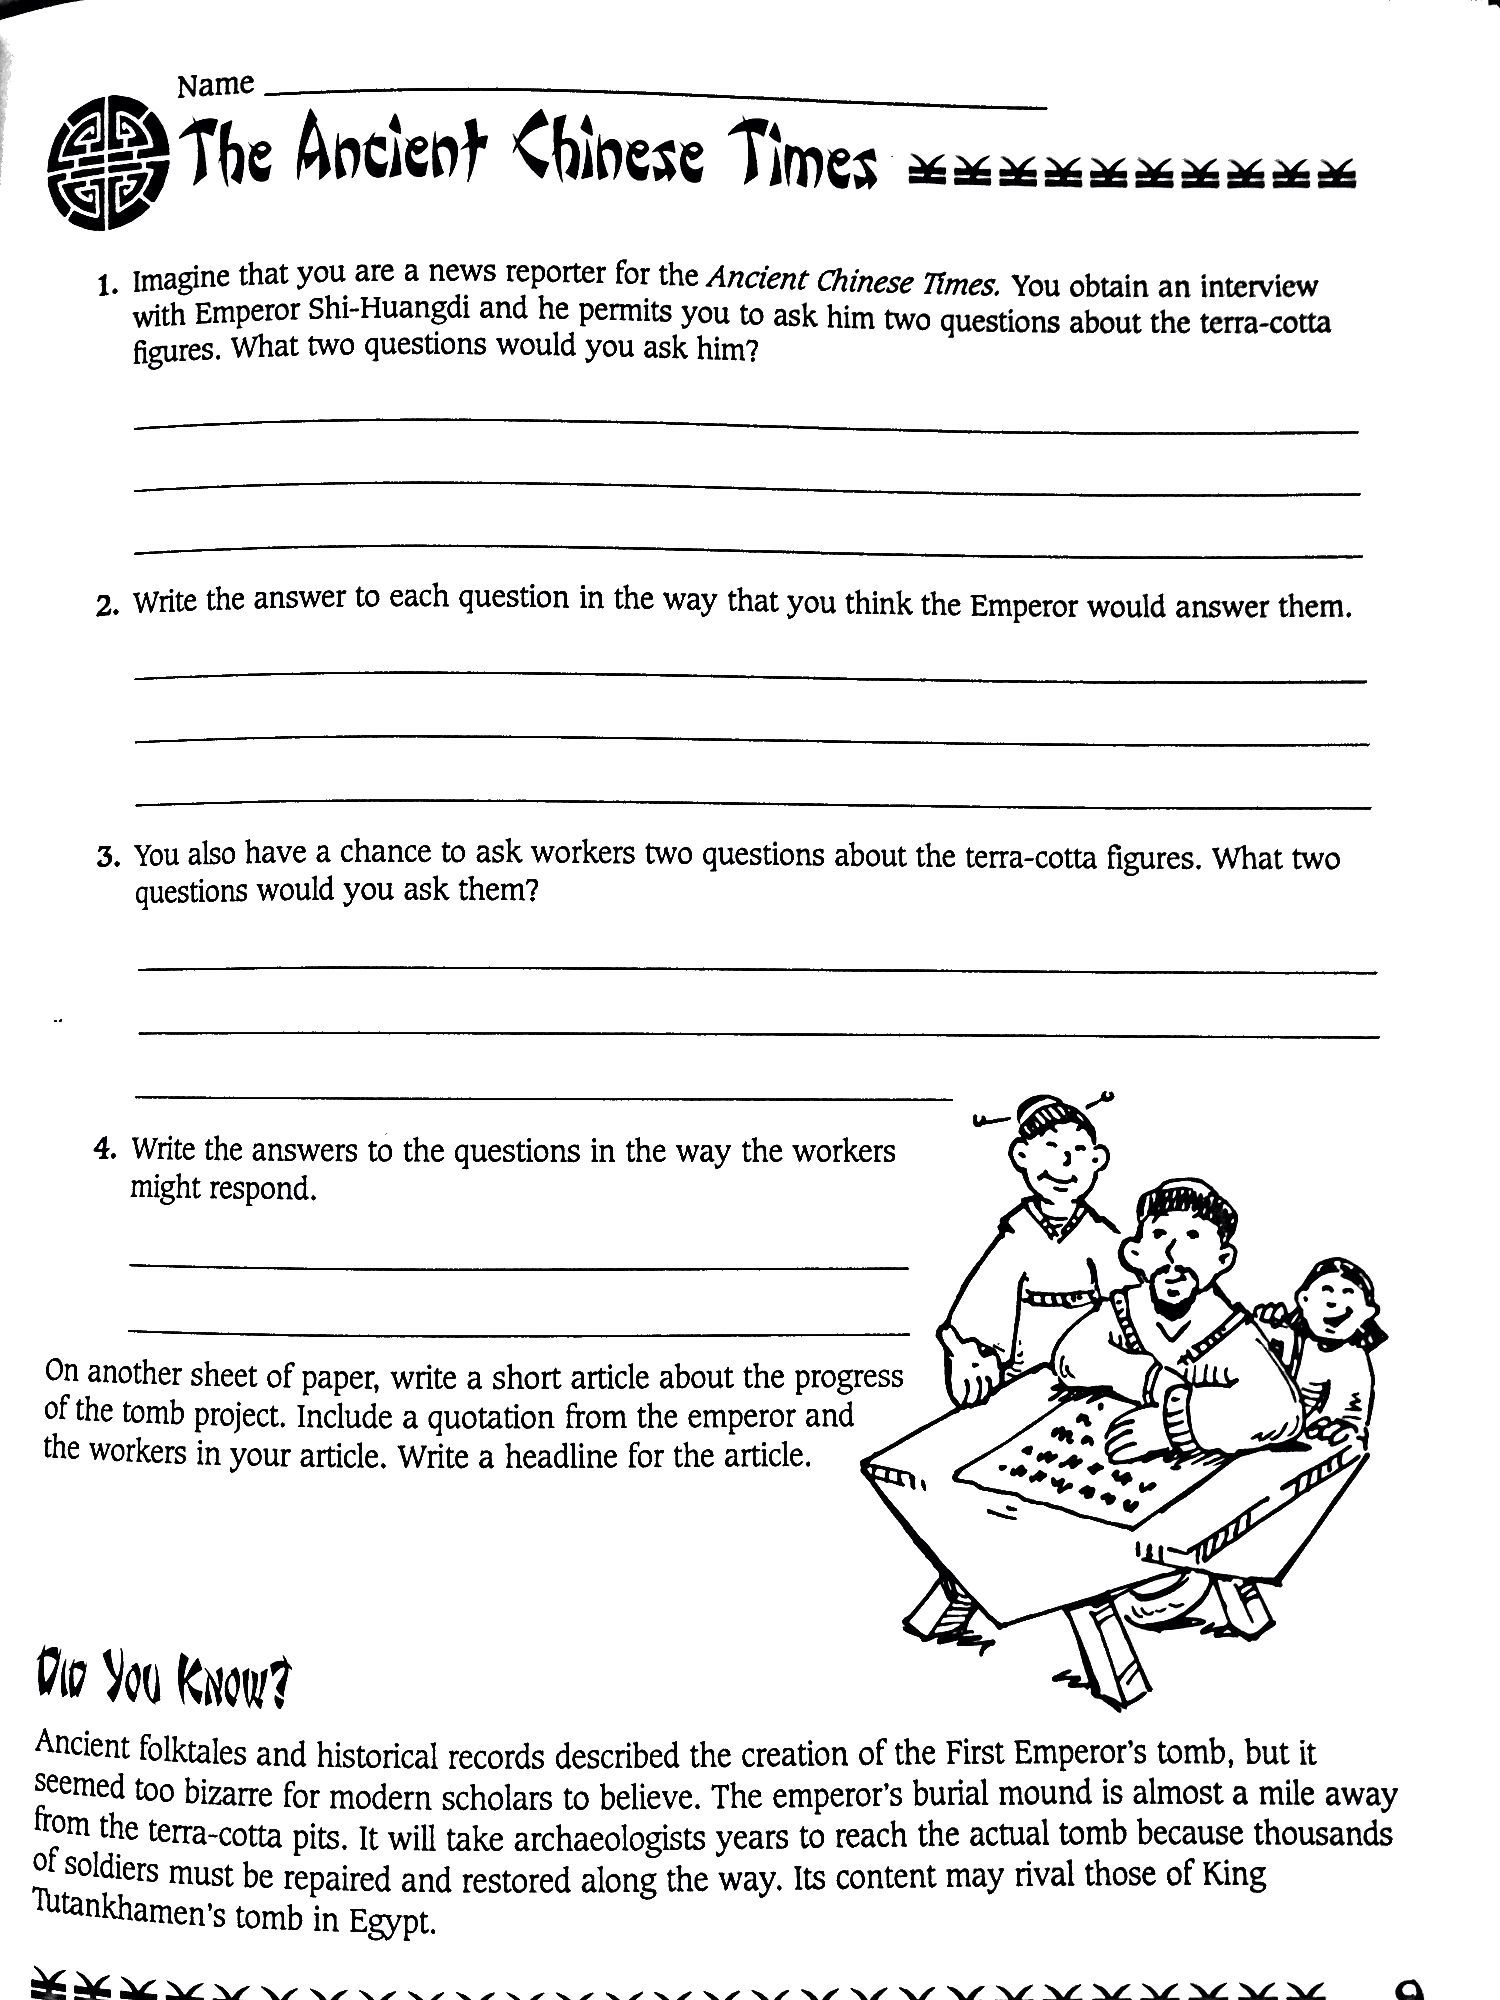 13 Best Images Of High School World History Worksheets World History 